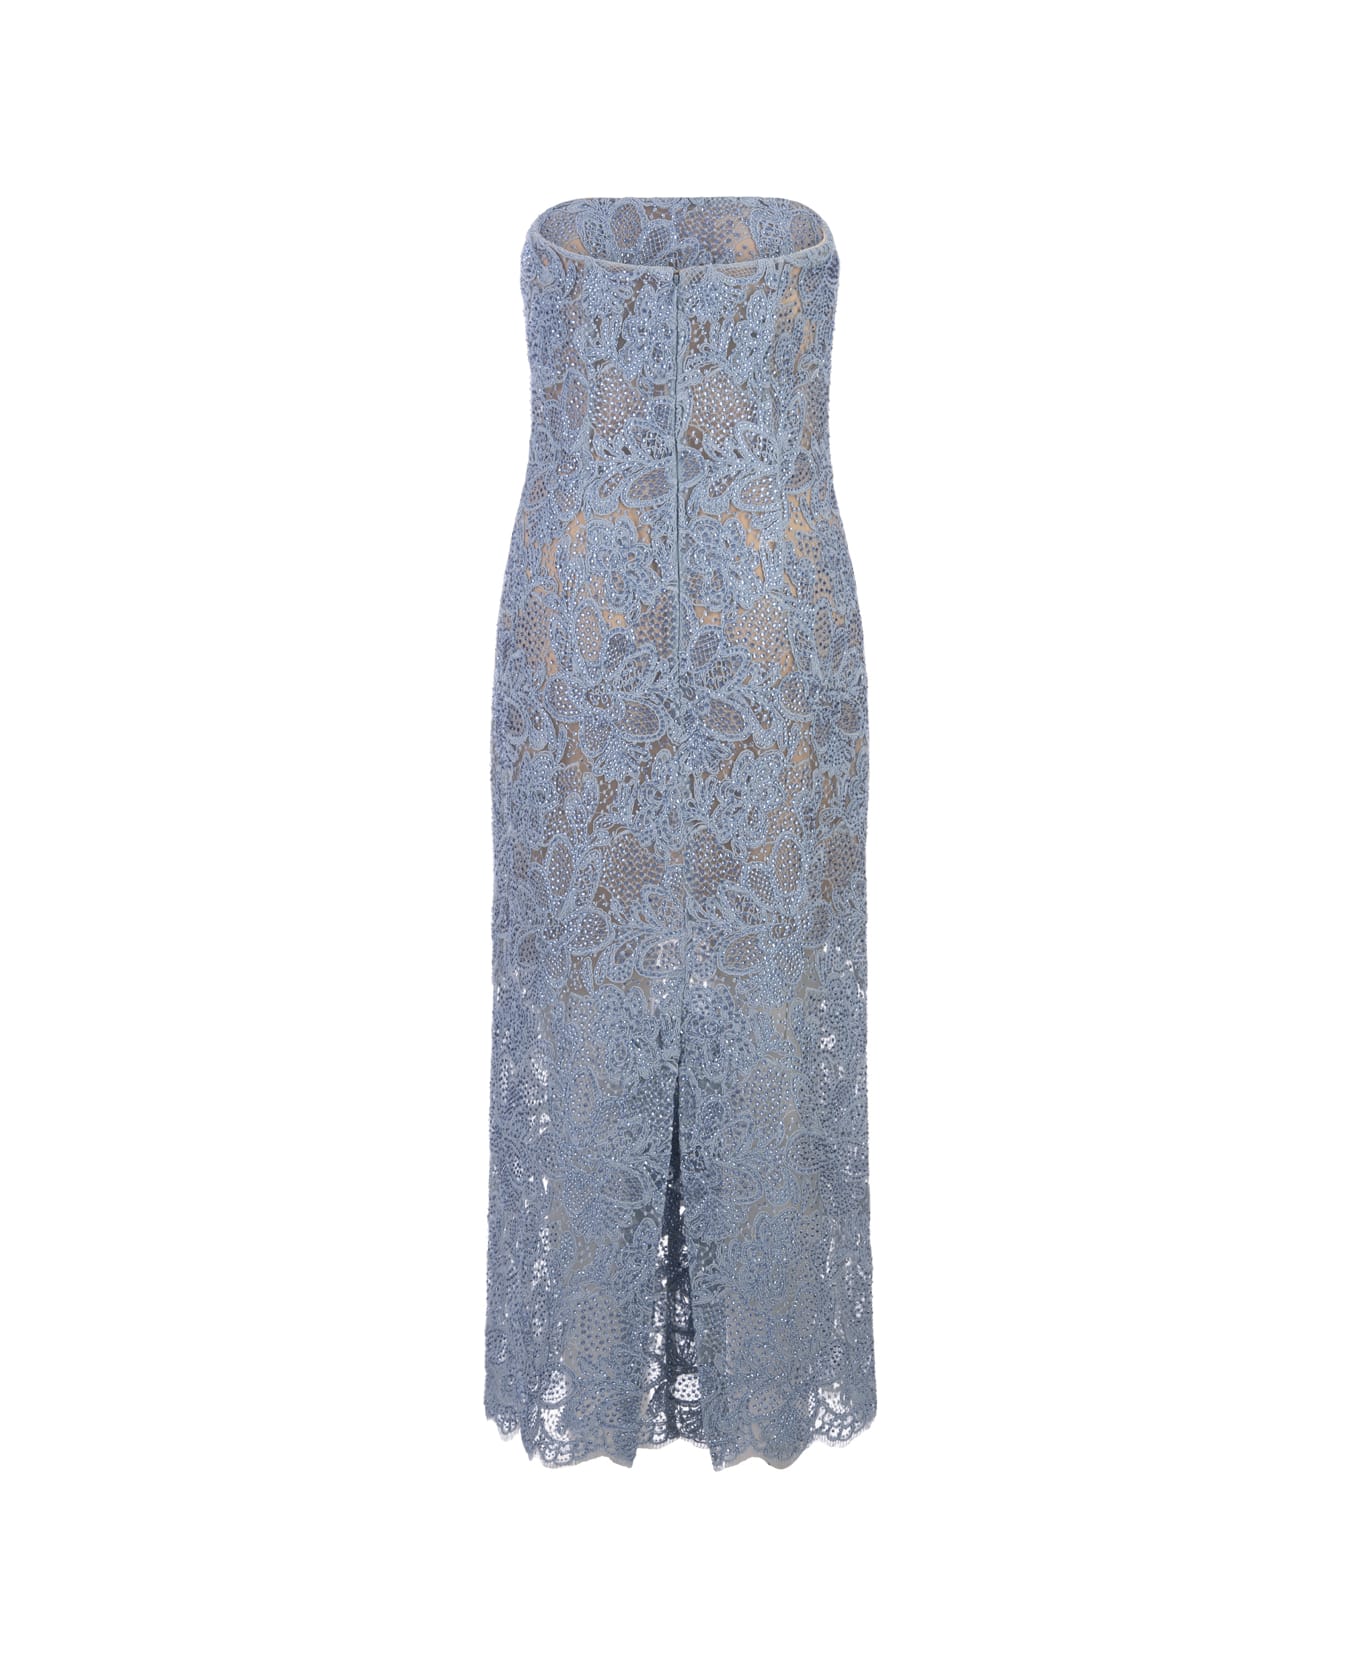 Ermanno Scervino Midi Dress In Light Blue Lace With Crystals - Blue ワンピース＆ドレス